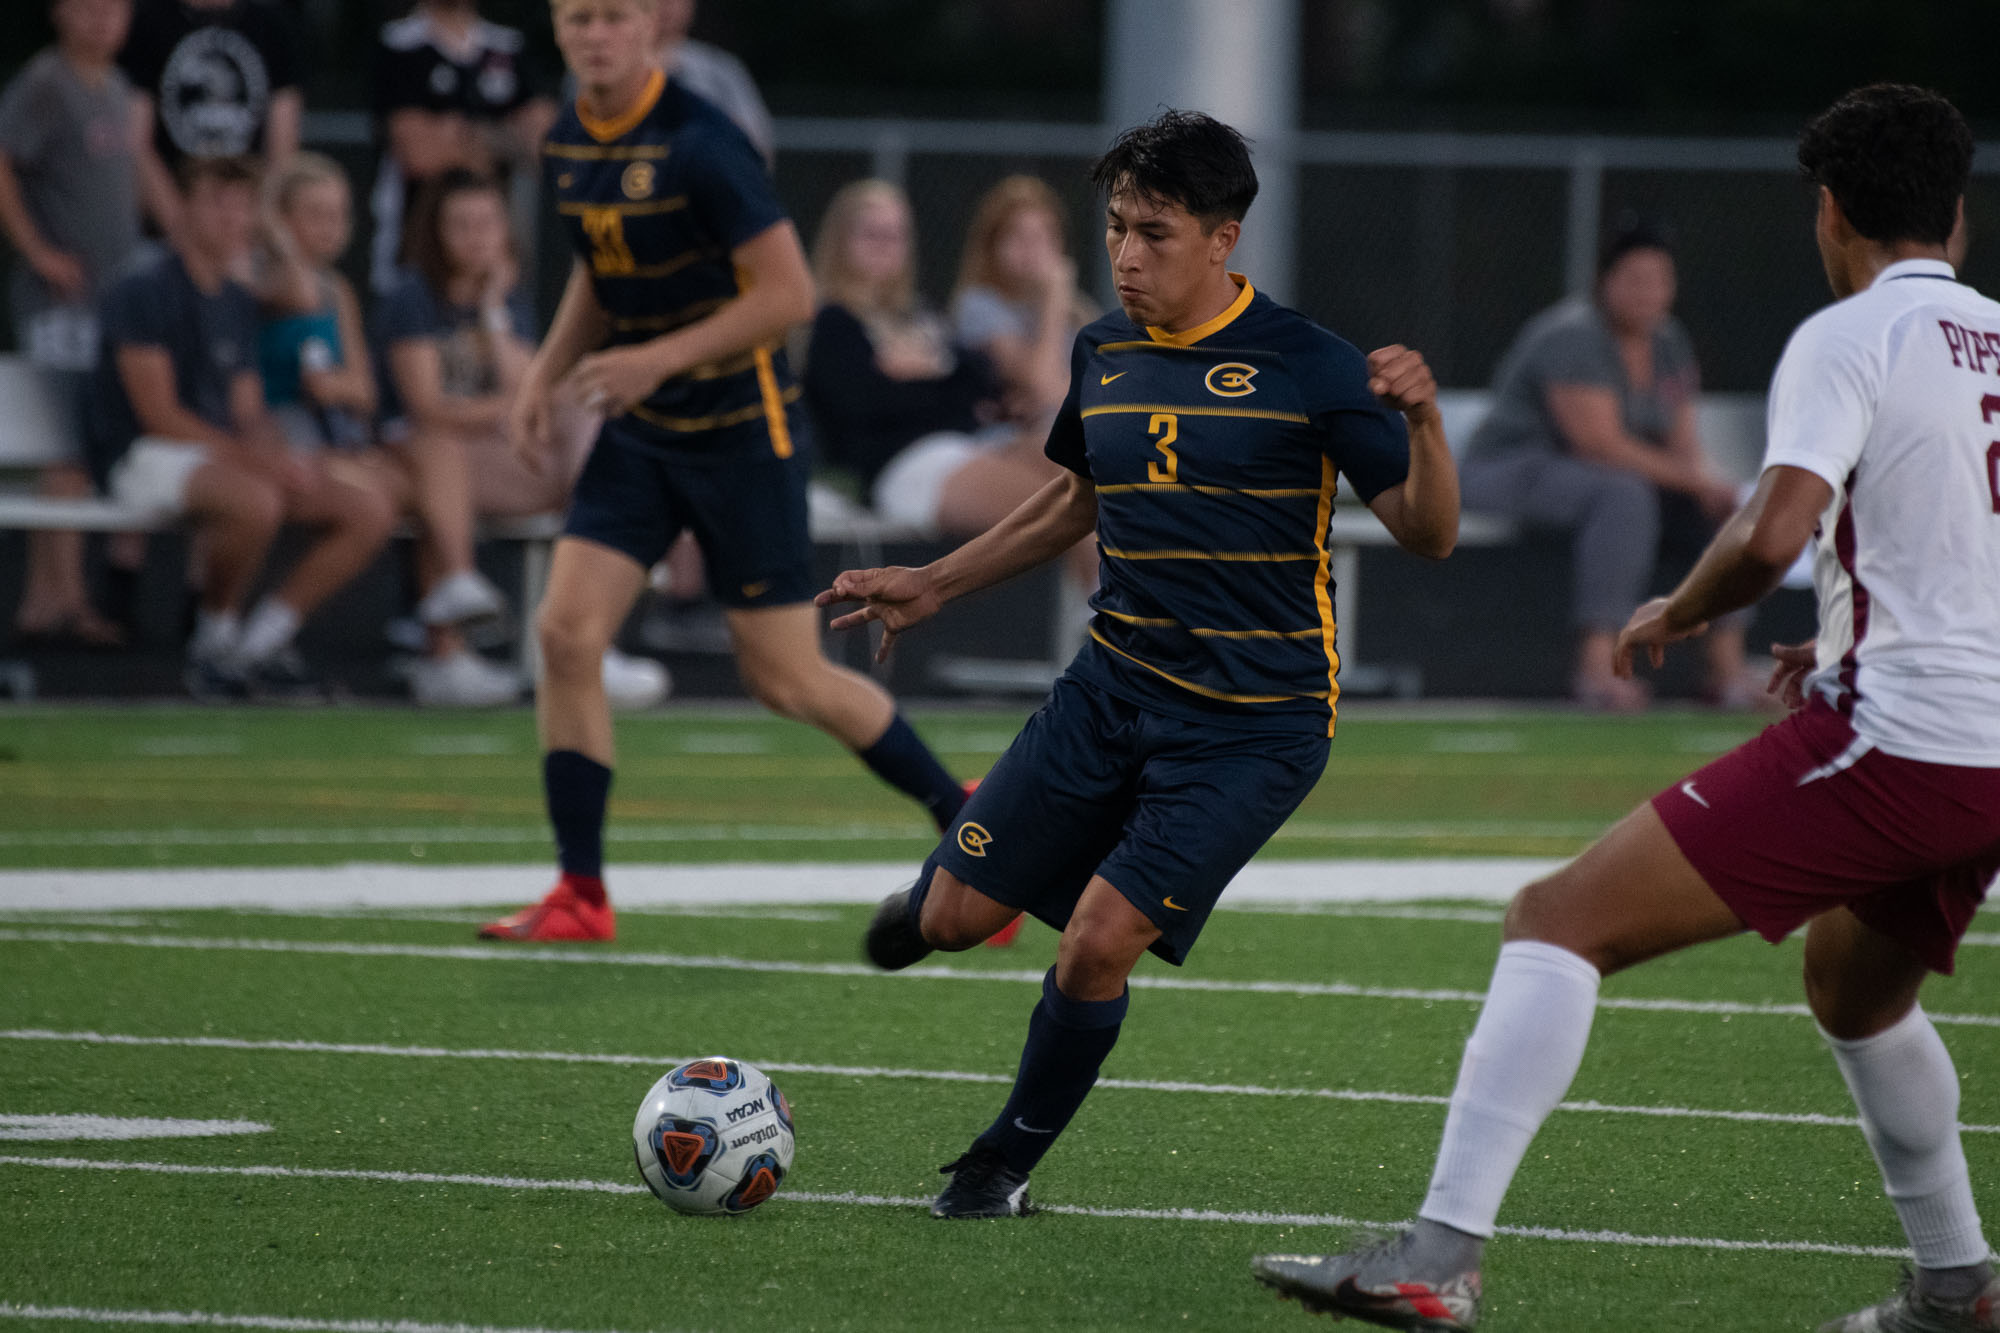 Men's Soccer Makes it Three In Row With 5-0 Shutout Against St. Scholastica